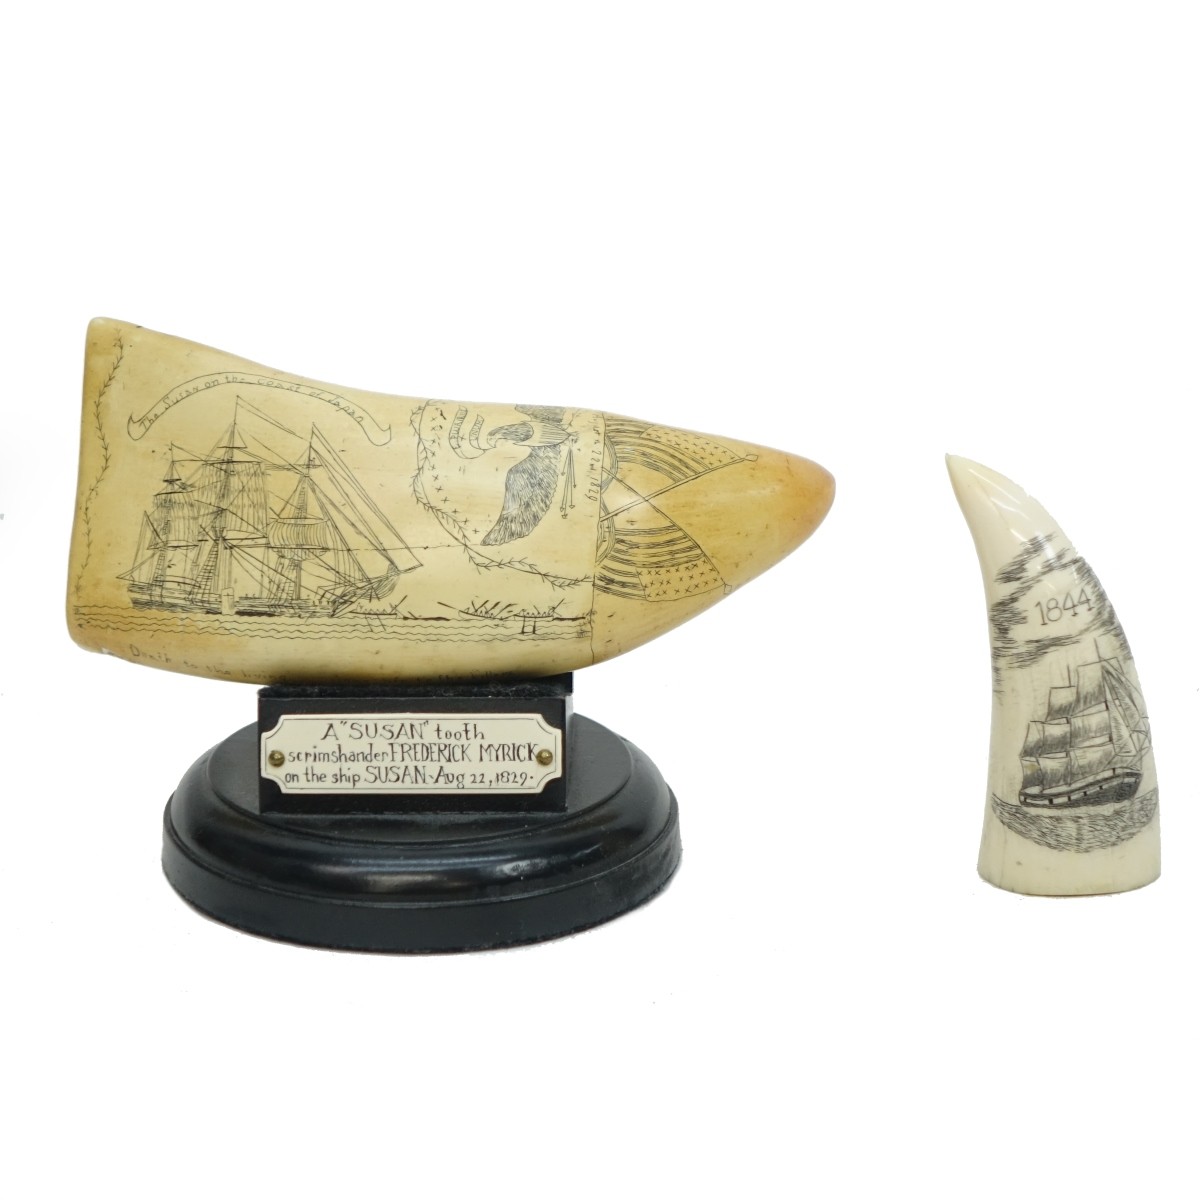 Two (2) Scrimshaw Tooth Carvings